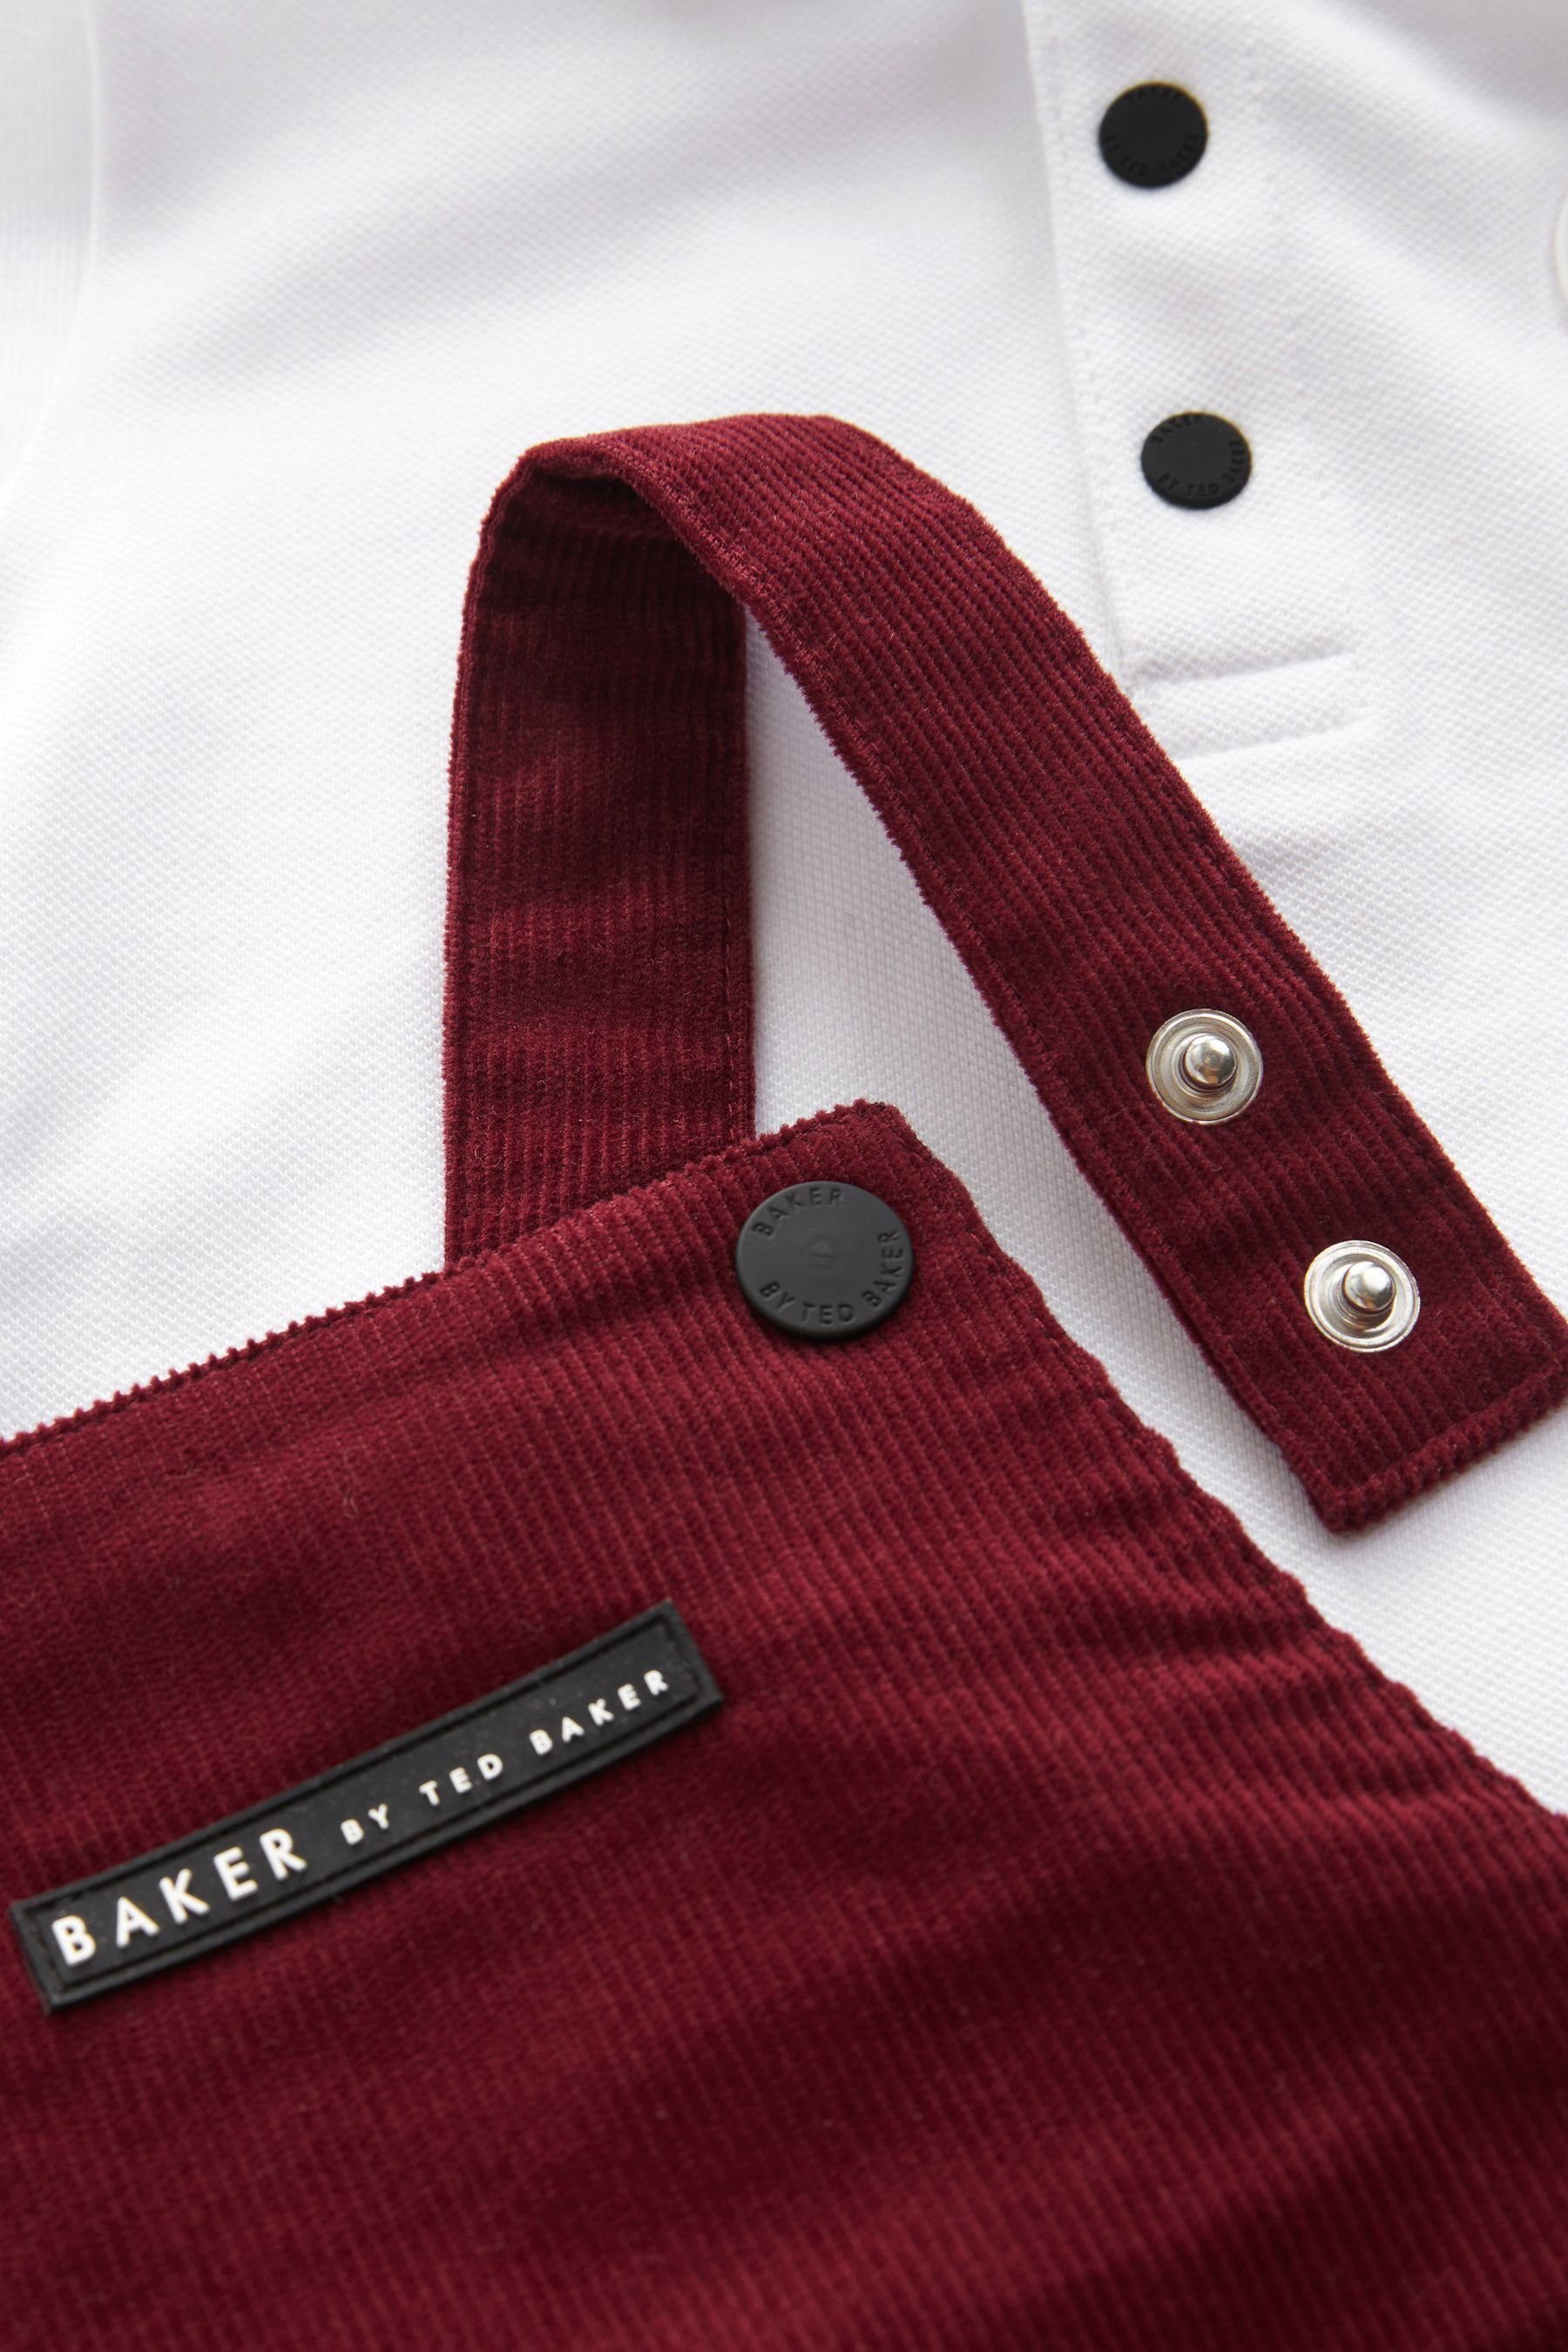 Baker by Ted Cord-Latzhose & (2-tlg) Baker Baker Baker Shirt Polo-Shirt Ted by und Hose